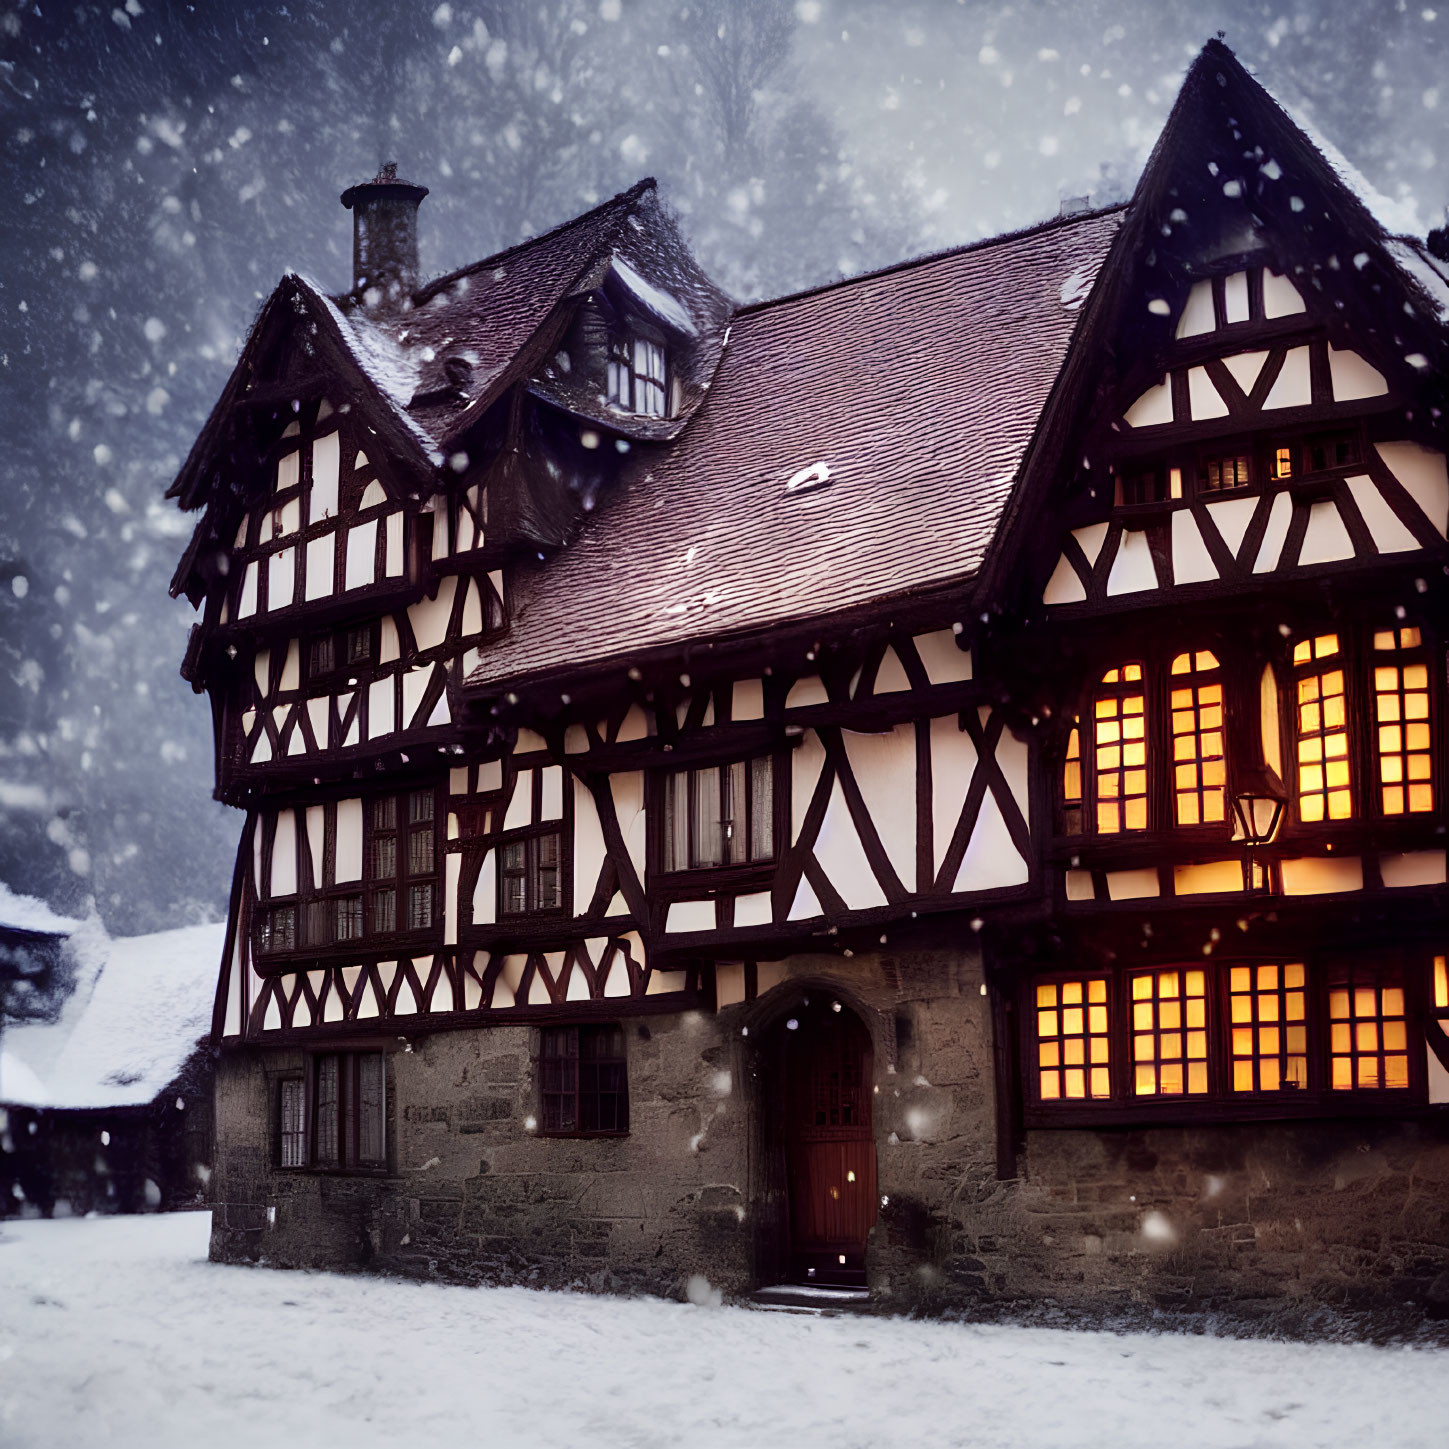 Snow-covered half-timbered house with lit windows in cozy winter scene